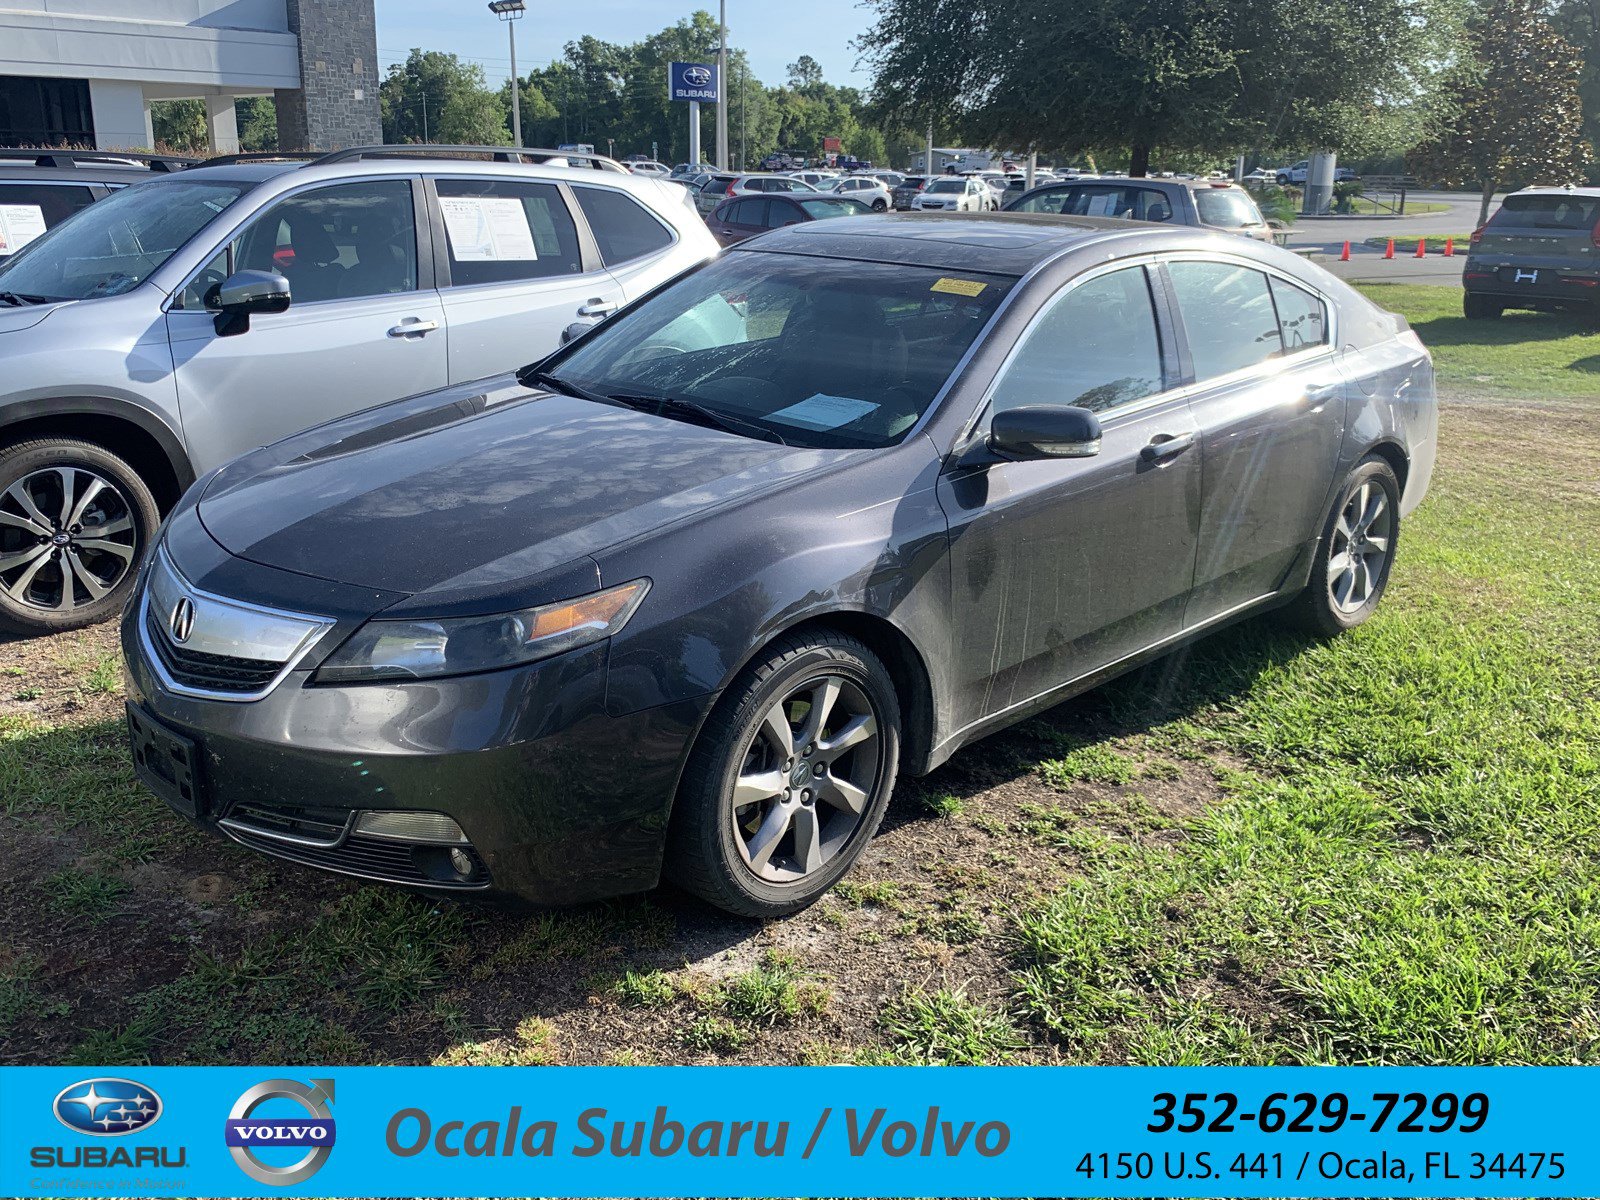 Used Acura Tl For Sale Right Now In Eustis Fl Autotrader